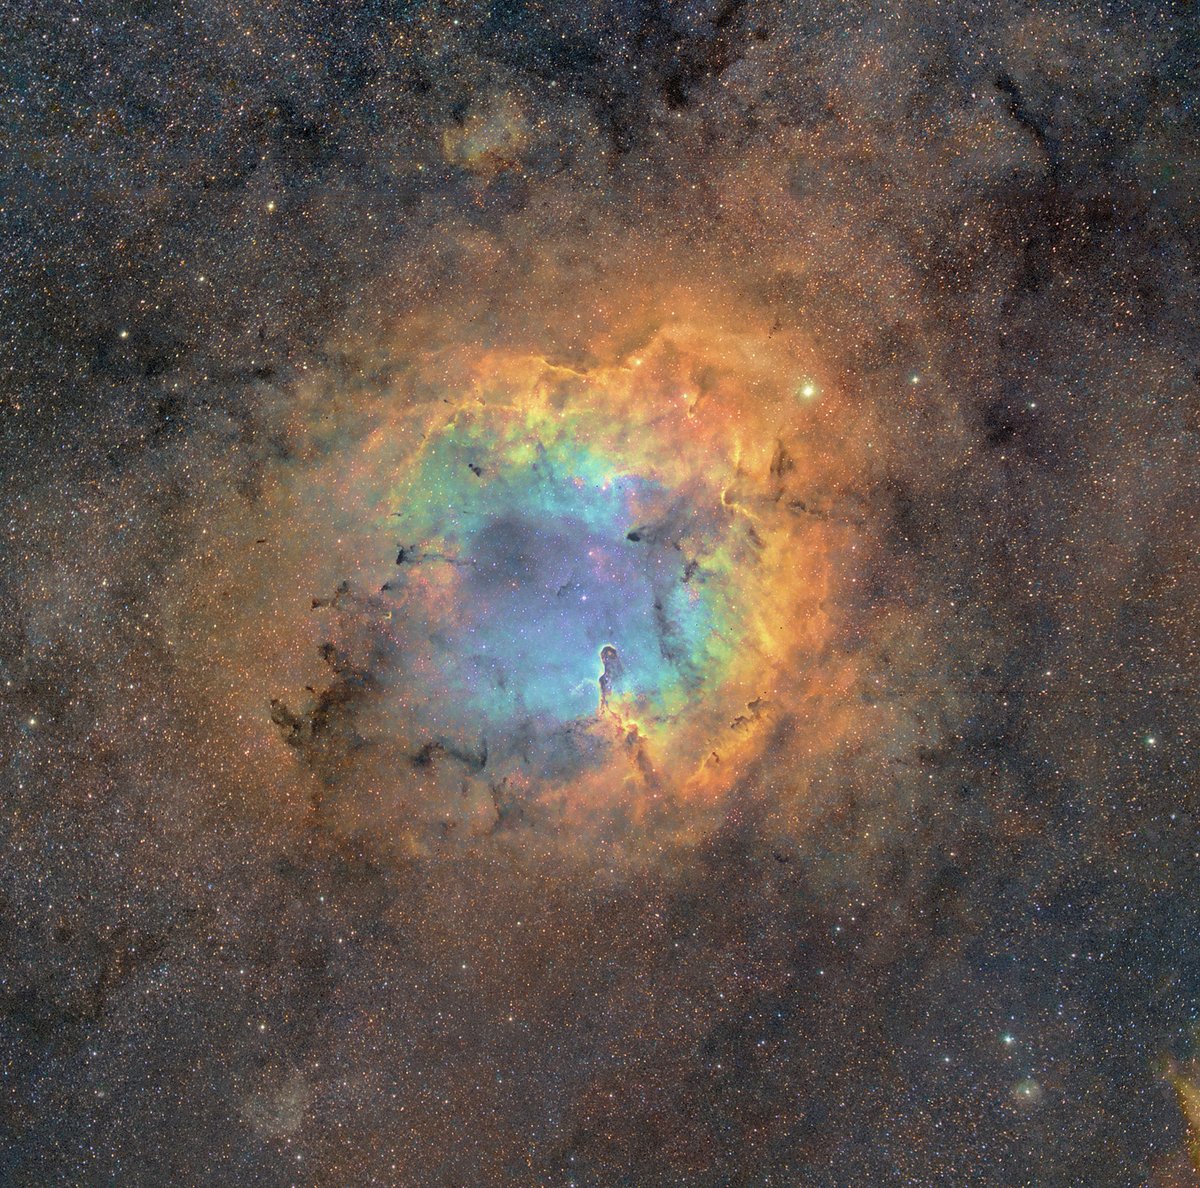 The vast mosaic was captured with Metsavainio’s hodgepodge telescope camera setup (consisting of a custom Apogee Alta U16 and Tokina AT-x 300mm f2.8 camera lens combo), which he has lovingly dubbed “Frankenstein’s Monster,” among other configurations over the years.